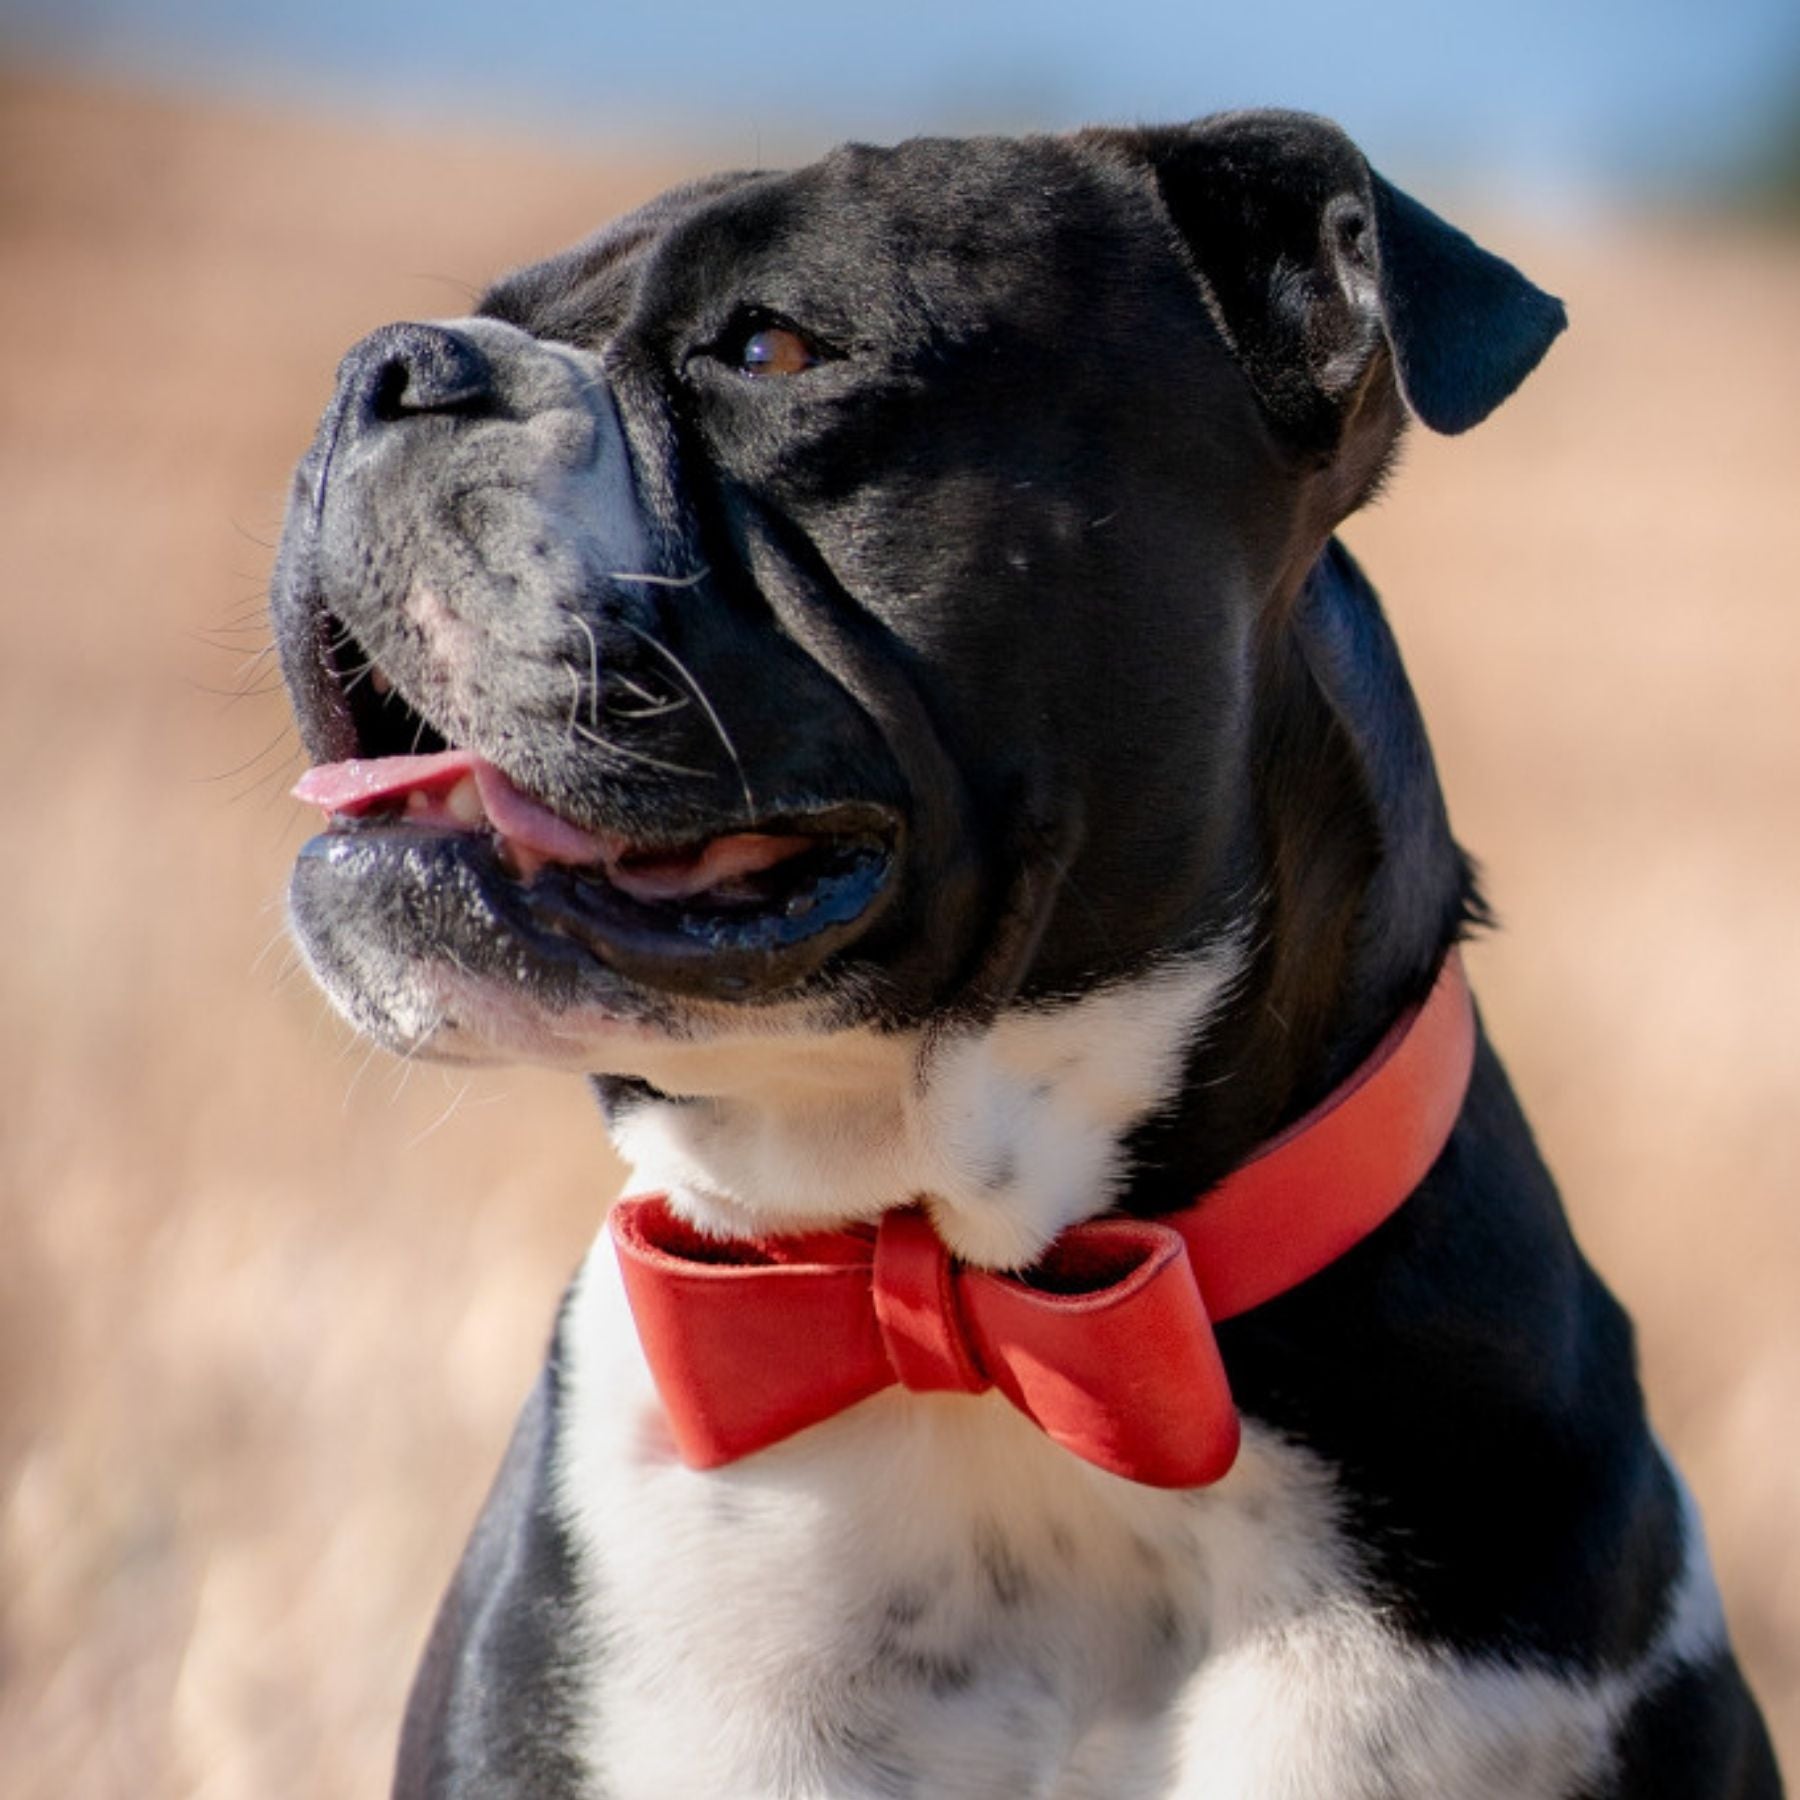 Leather bow tie for collars